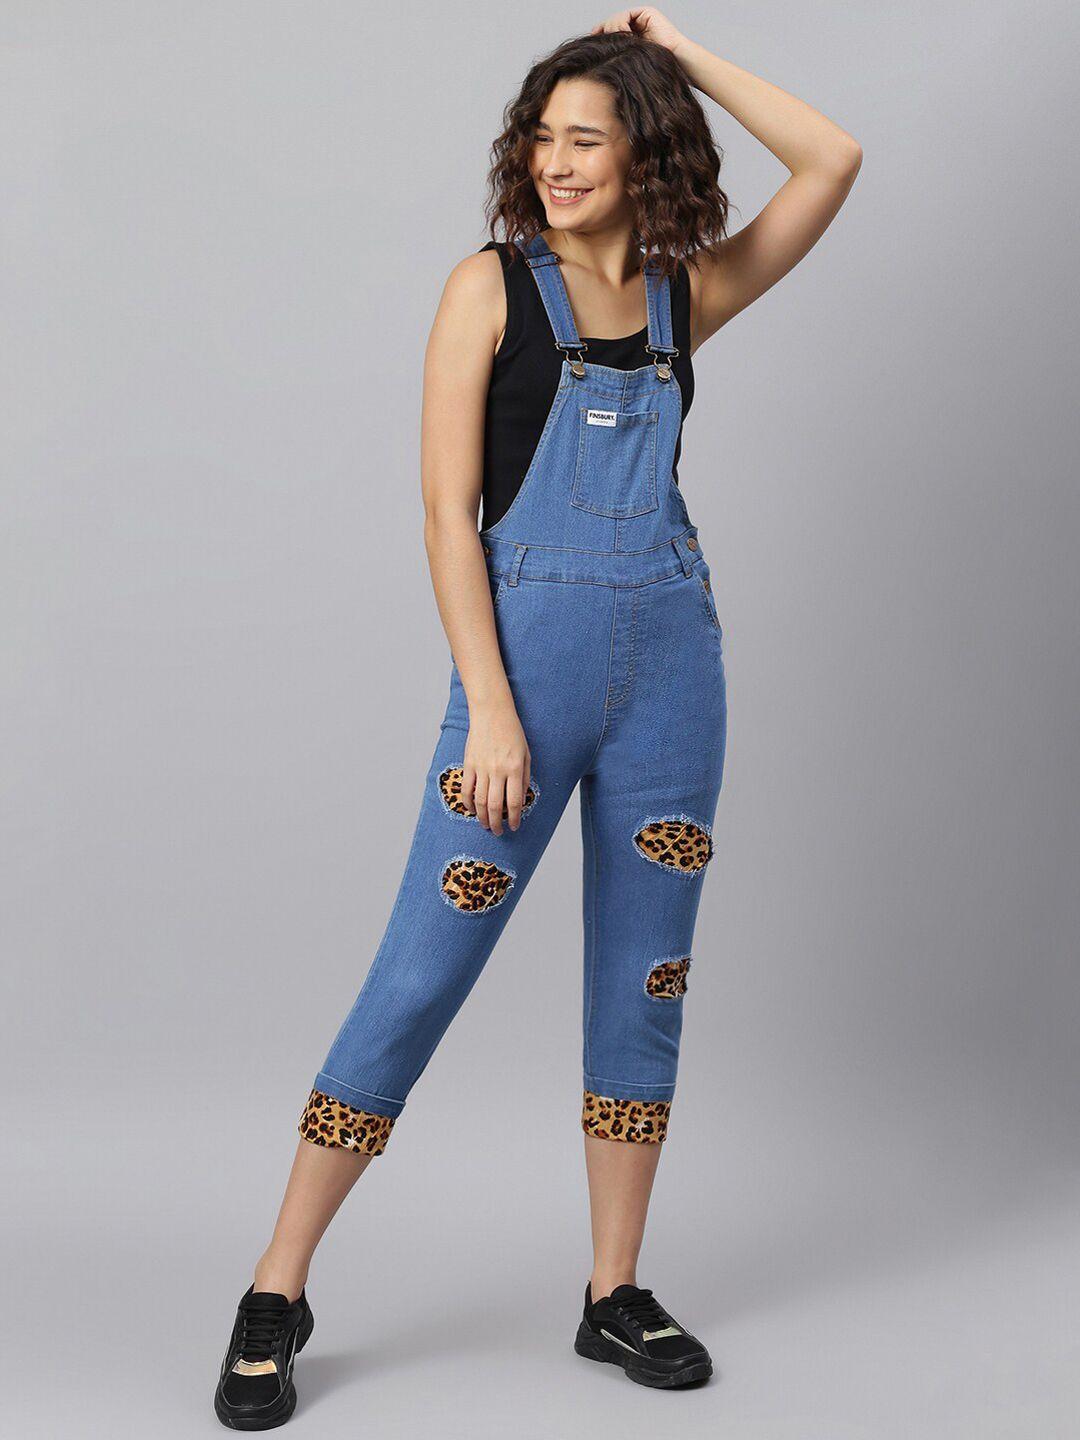 finsbury-london-women-blue-solid-slim-fit-cotton-dungarees